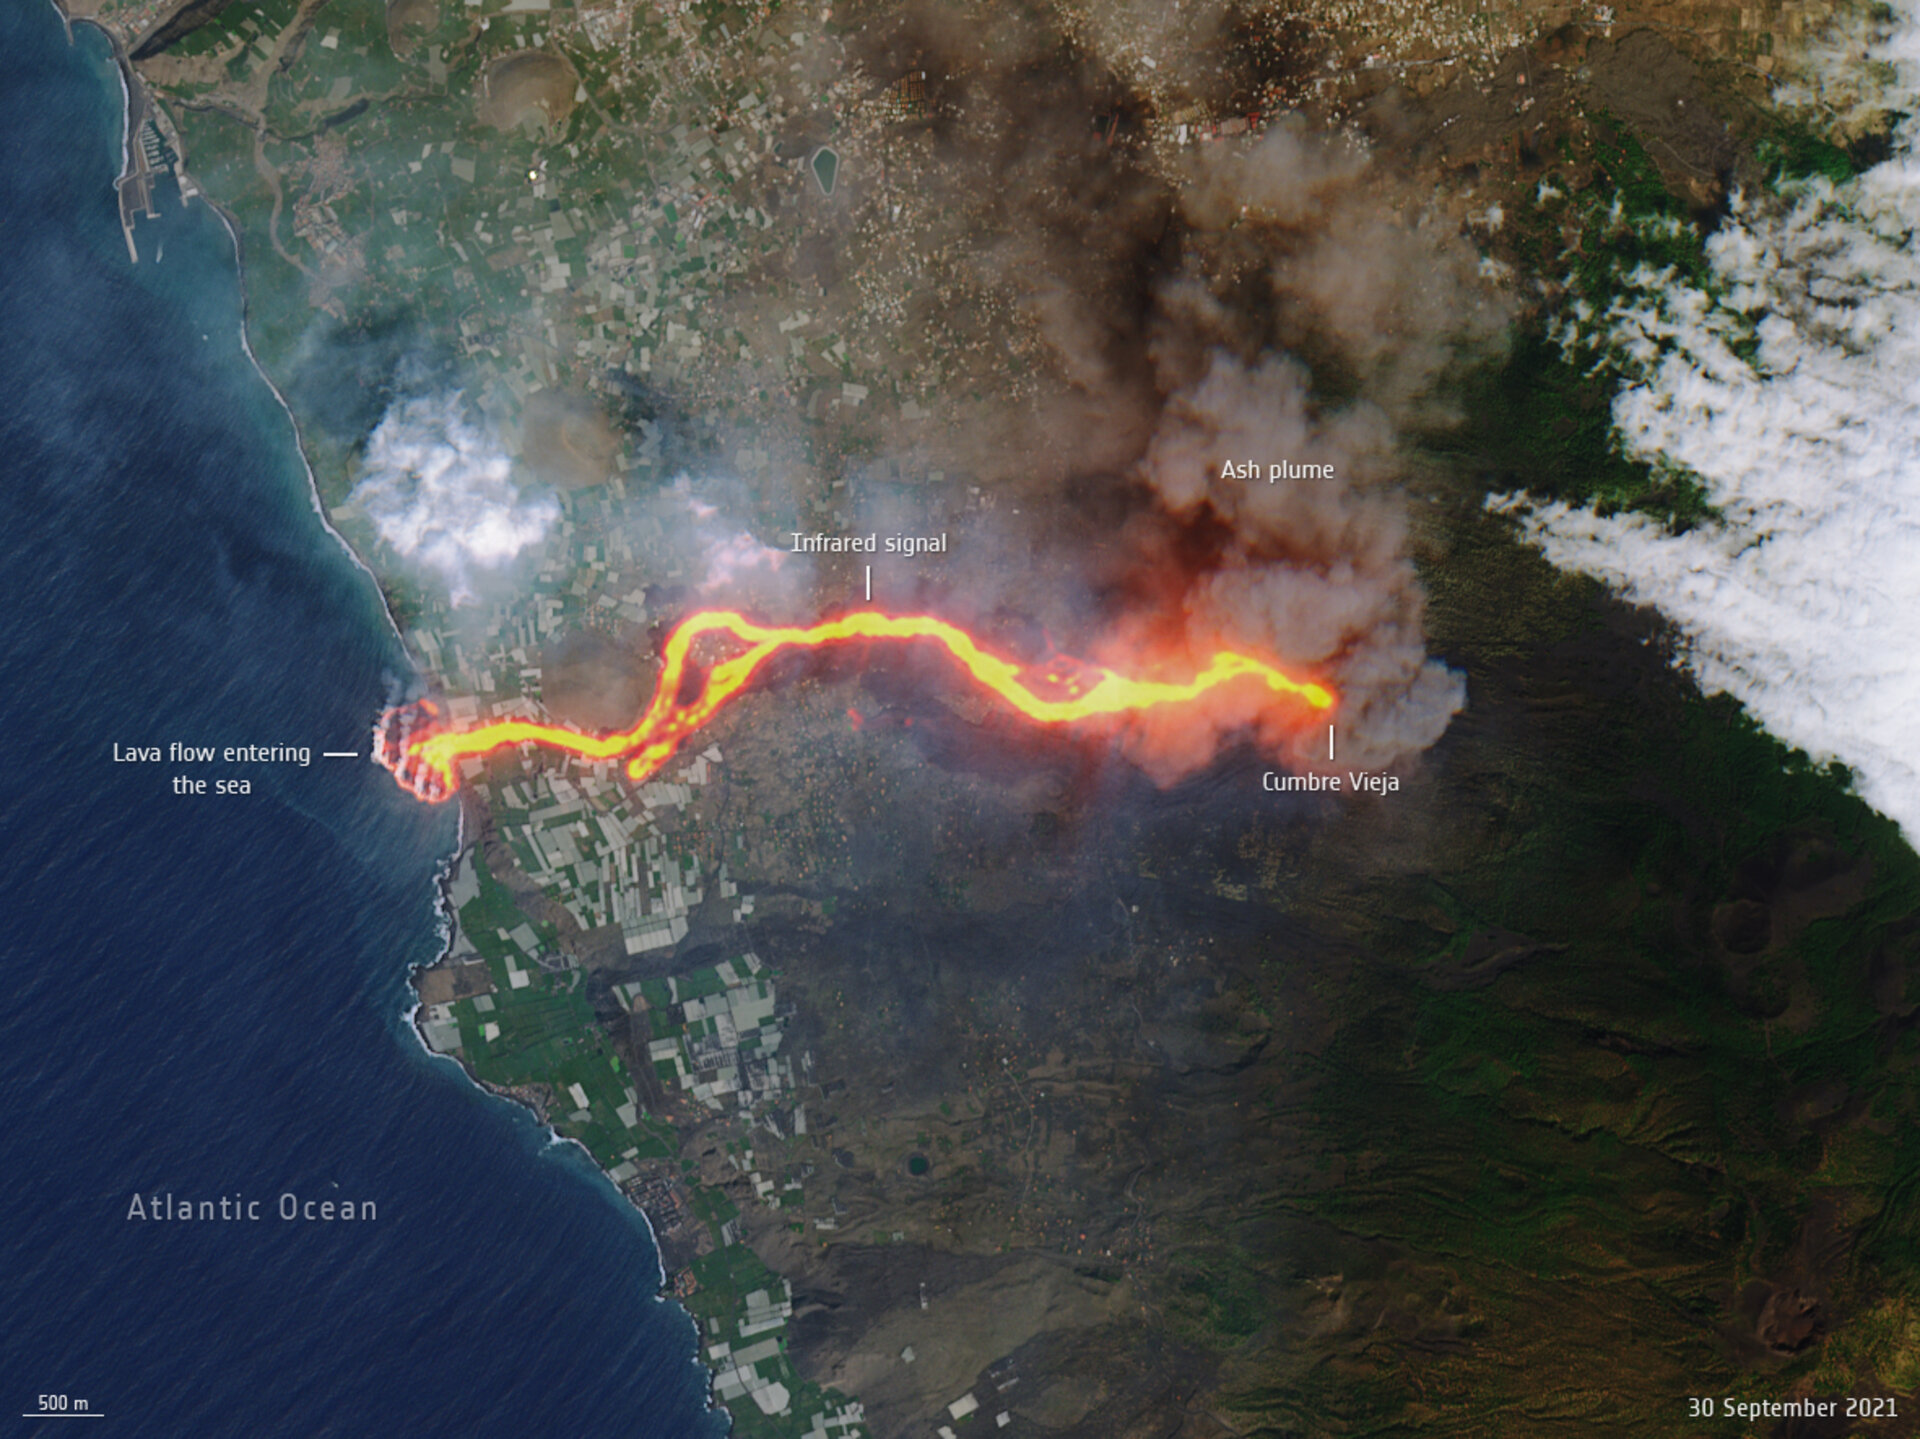 This image, captured by Copernicus Sentinel-2 on 30 September 2021, shows the flow of lava from the volcano erupting on the Spanish island of La Palma.